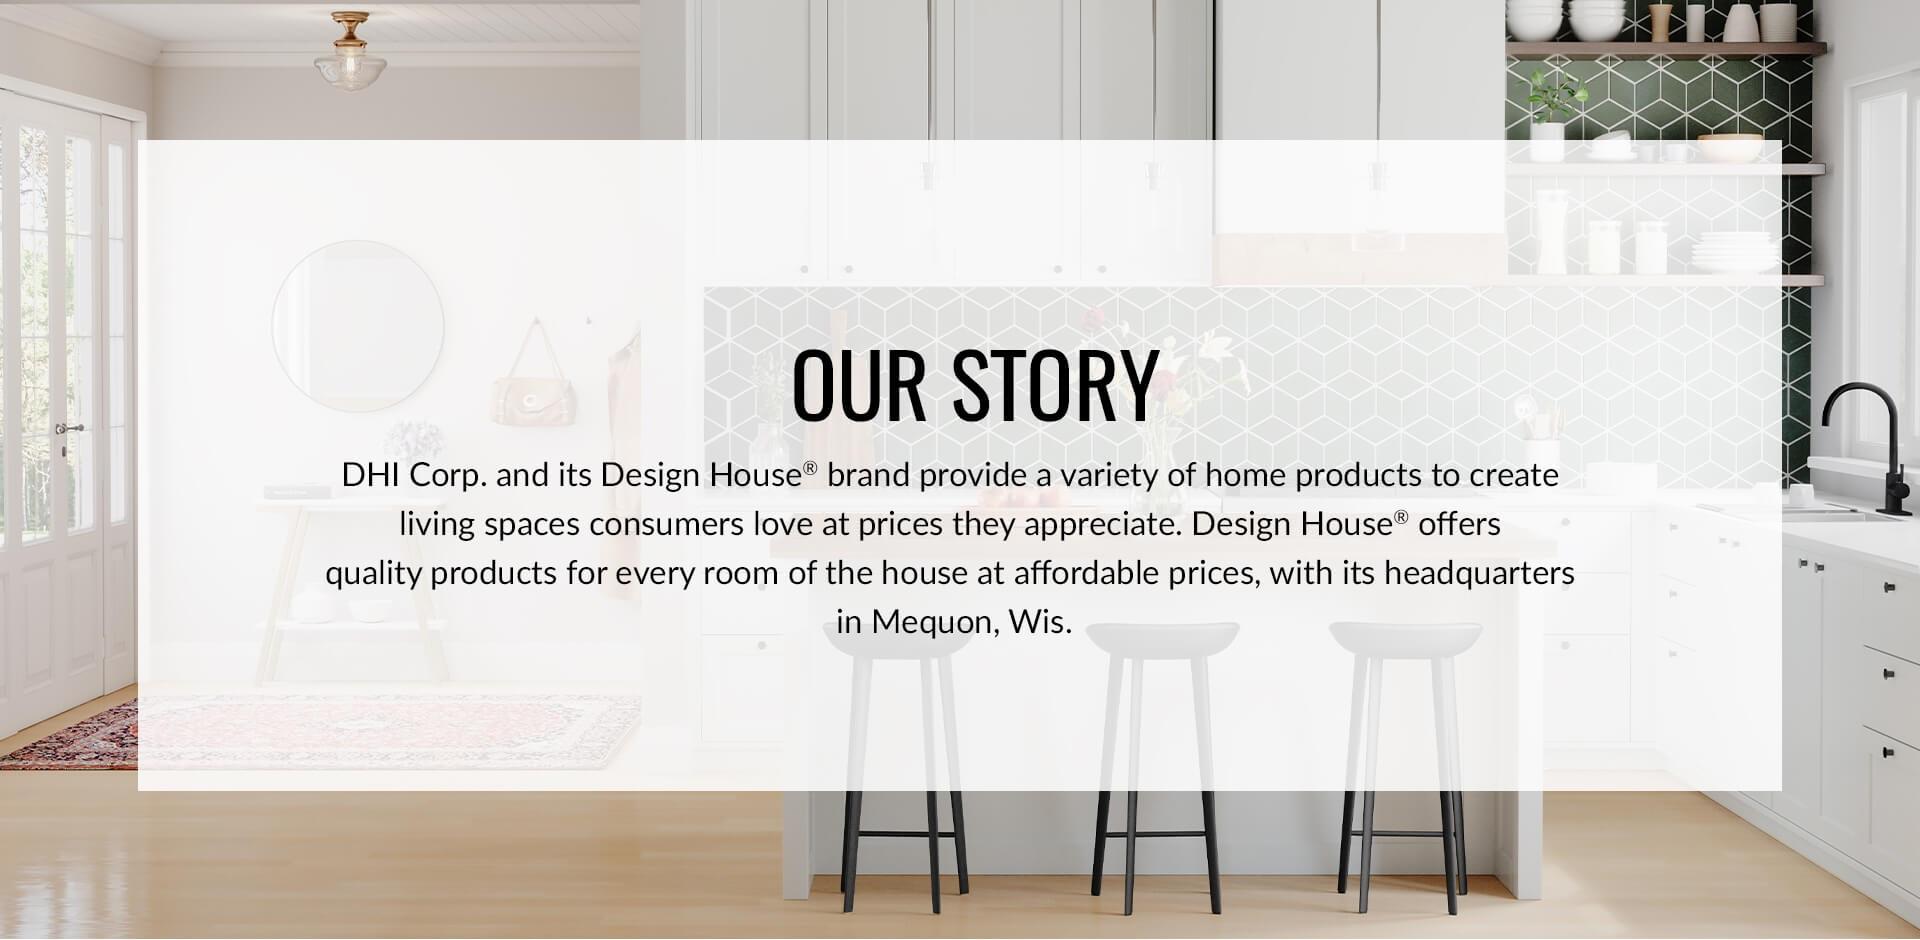 DHI Corp. and its Design House brand provide a variety of home products to create living spaces consumers love at prices they appreciate.